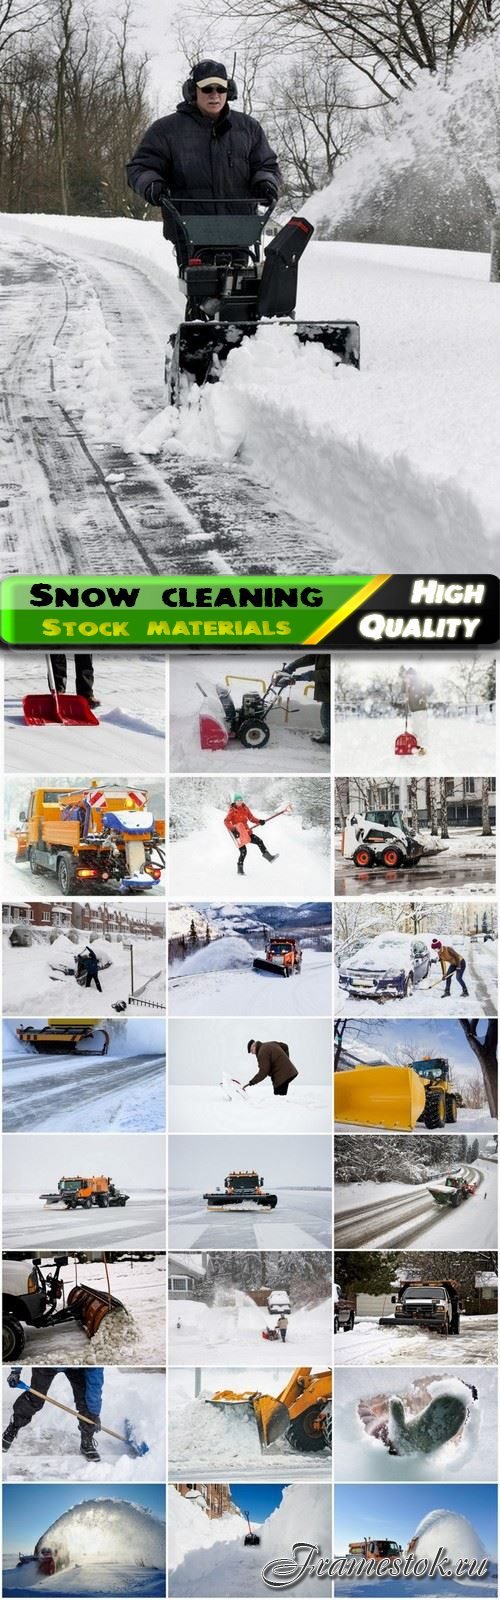 Winter snow cleaning people and municipal vehicles 25 HQ Jpg